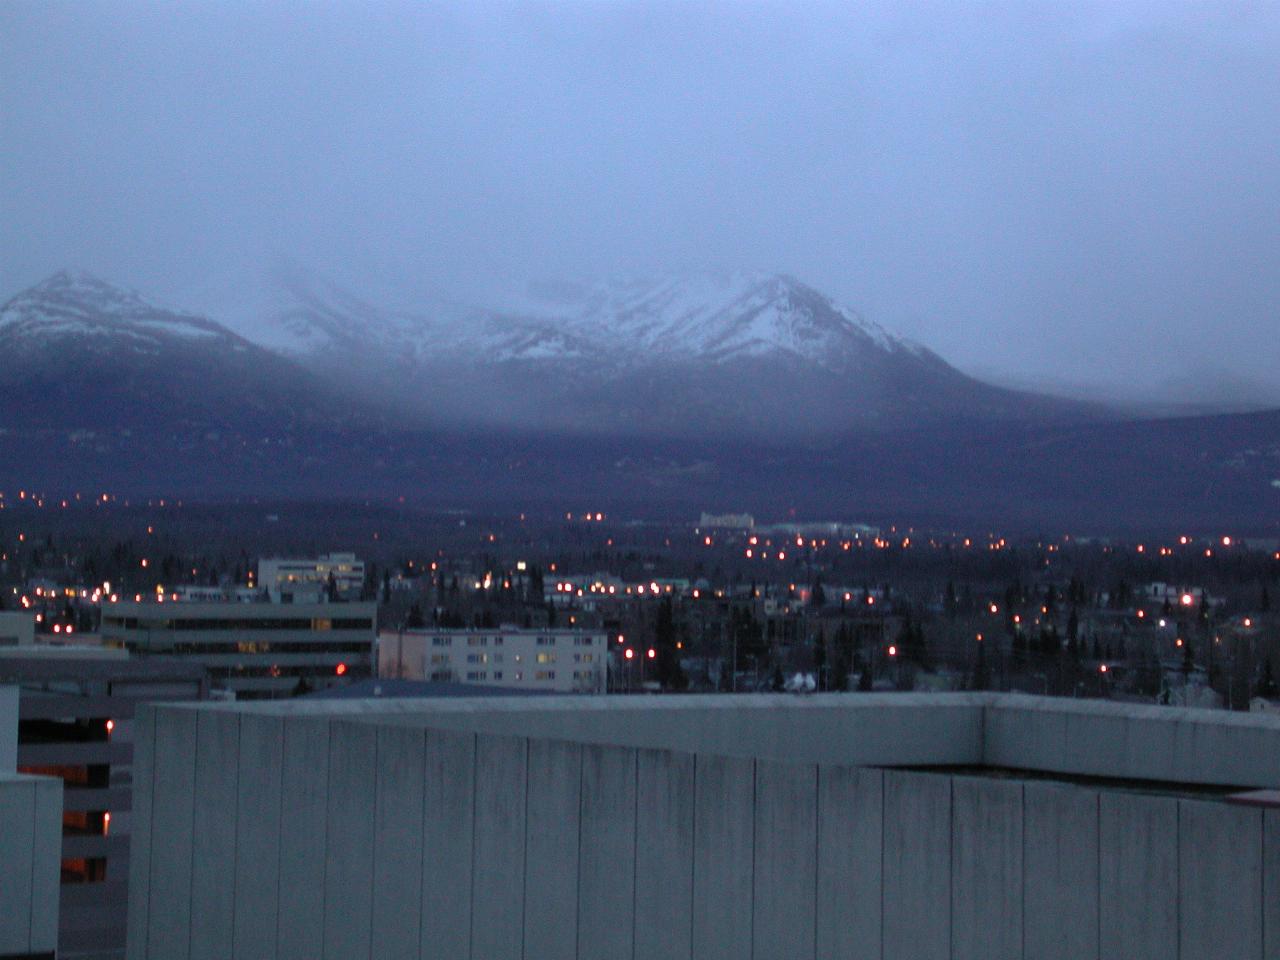 Dusk settles on Anchorage's eastern suburbs and mountains